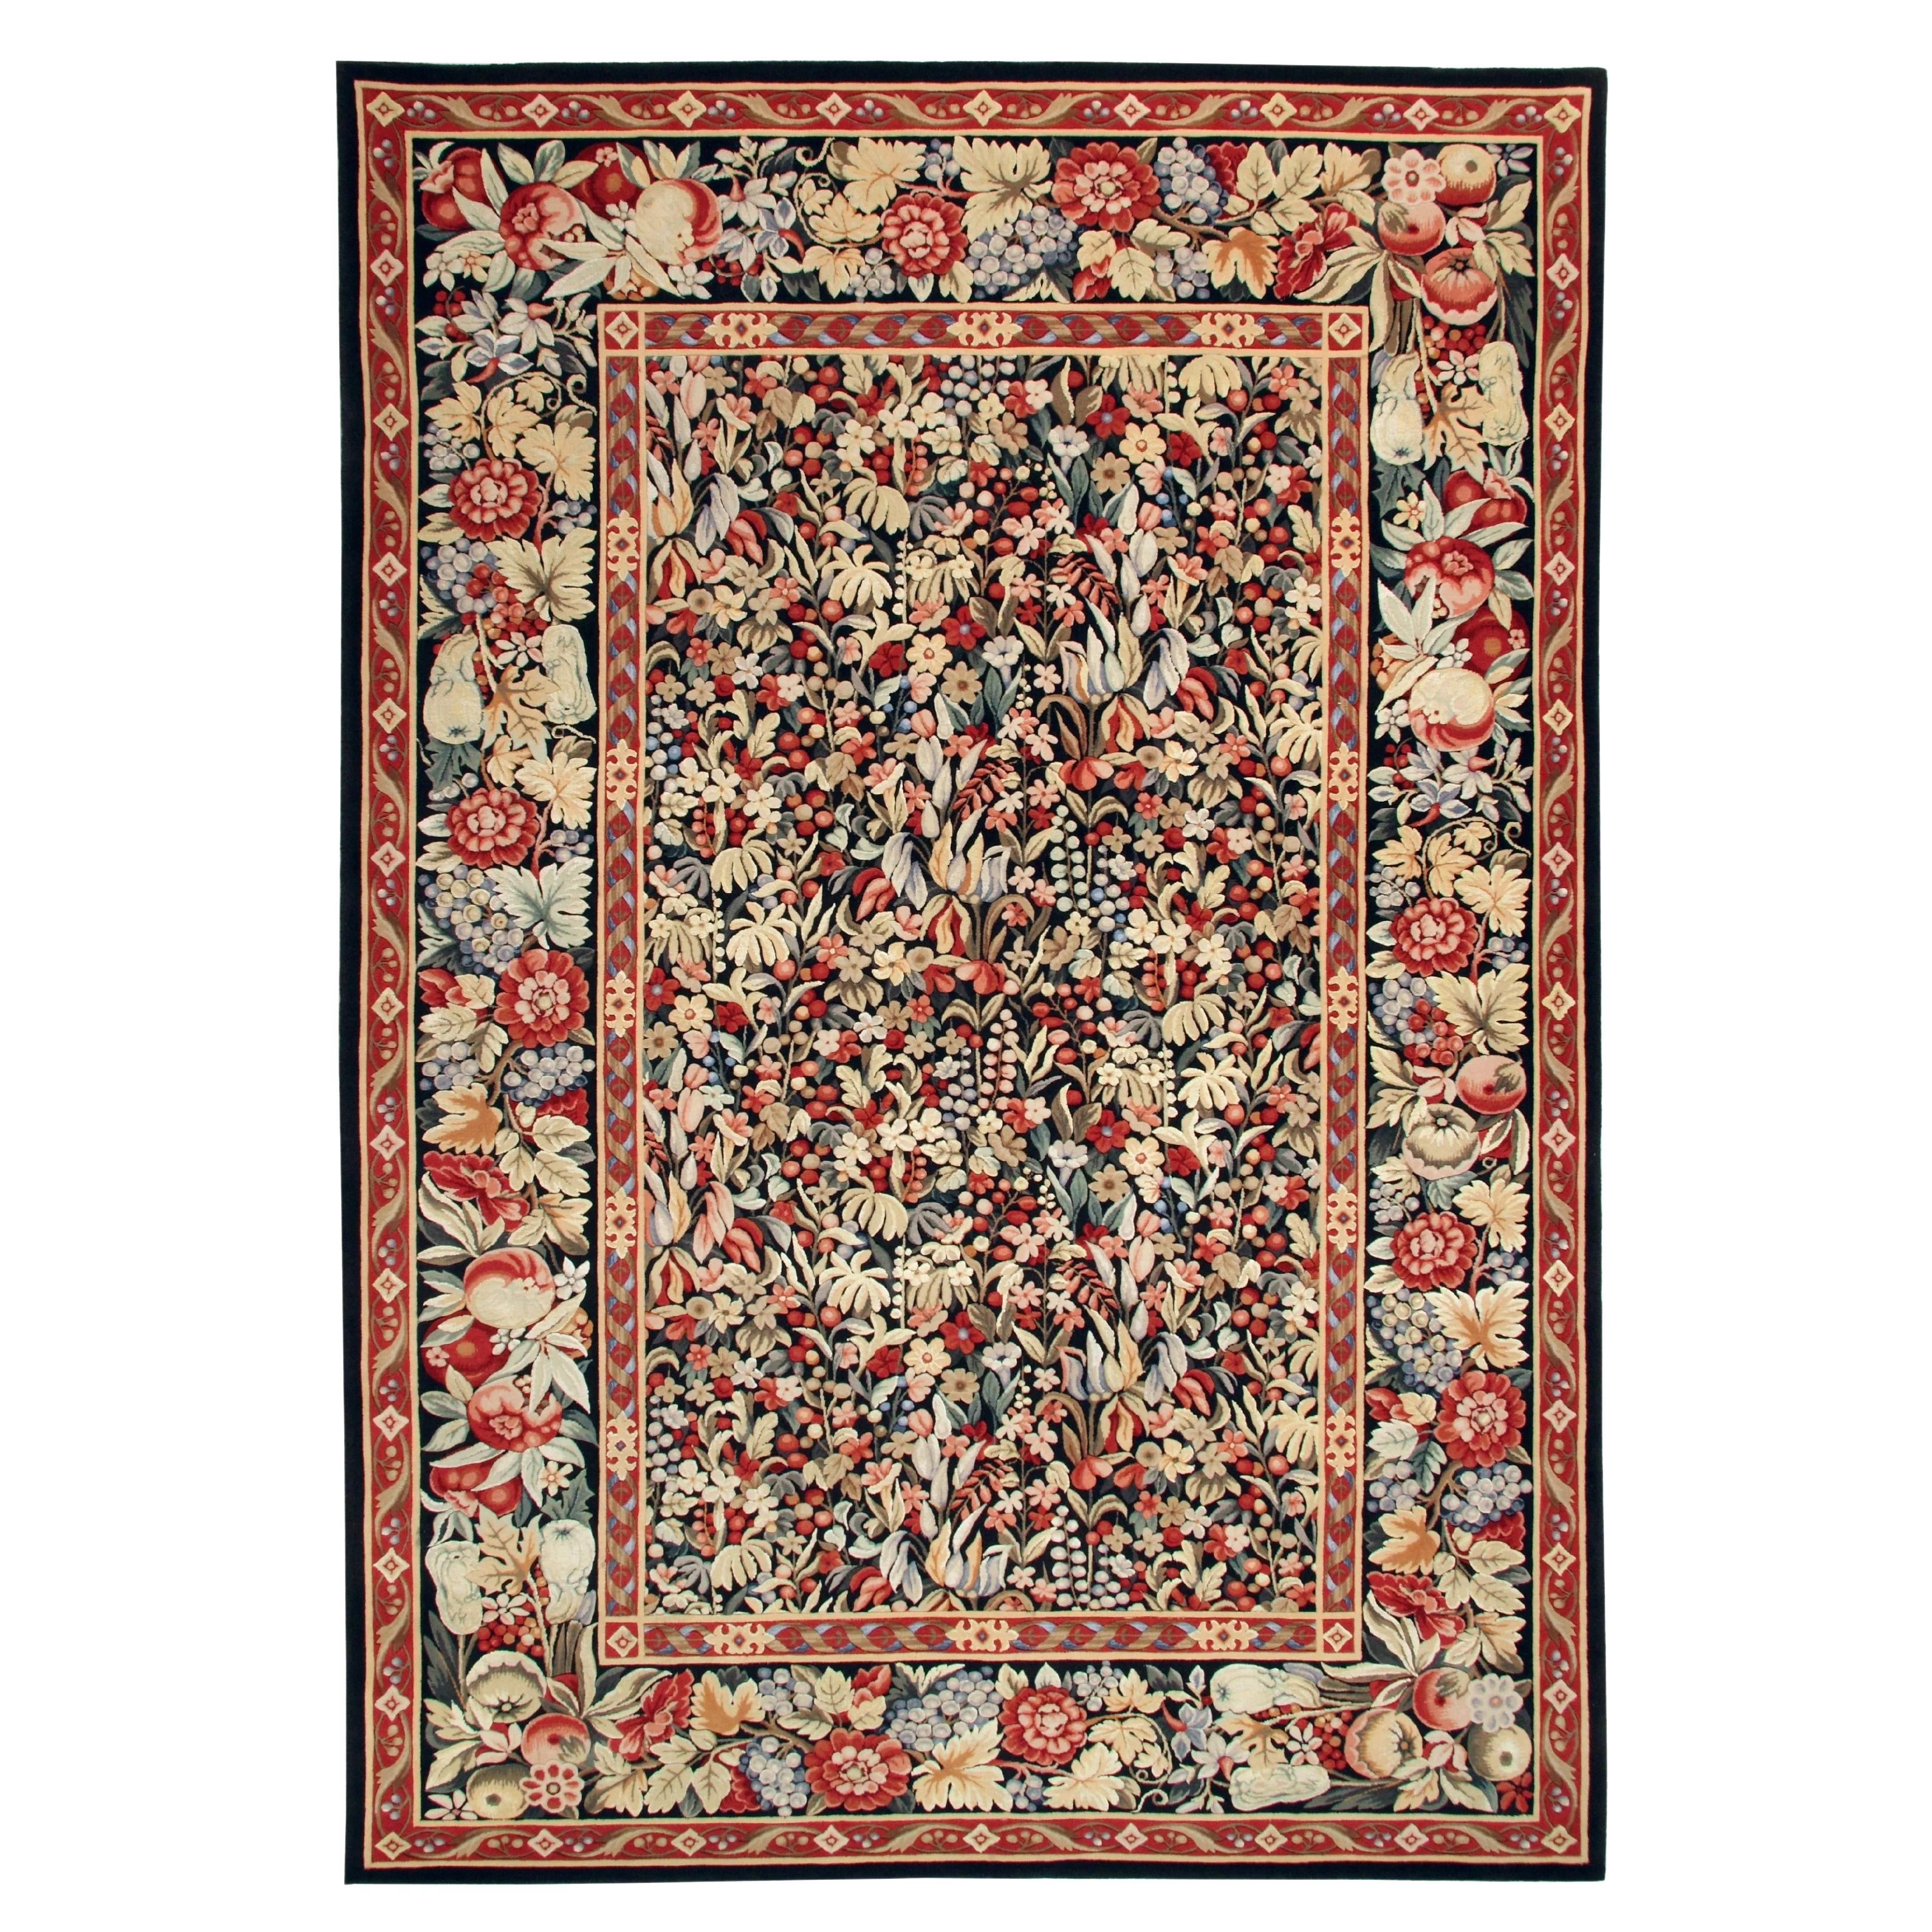 VIA COMO 'Regine' Rug Hand Knotted Wool Silk 6x9 ft One of a Kind Fine Carpet For Sale